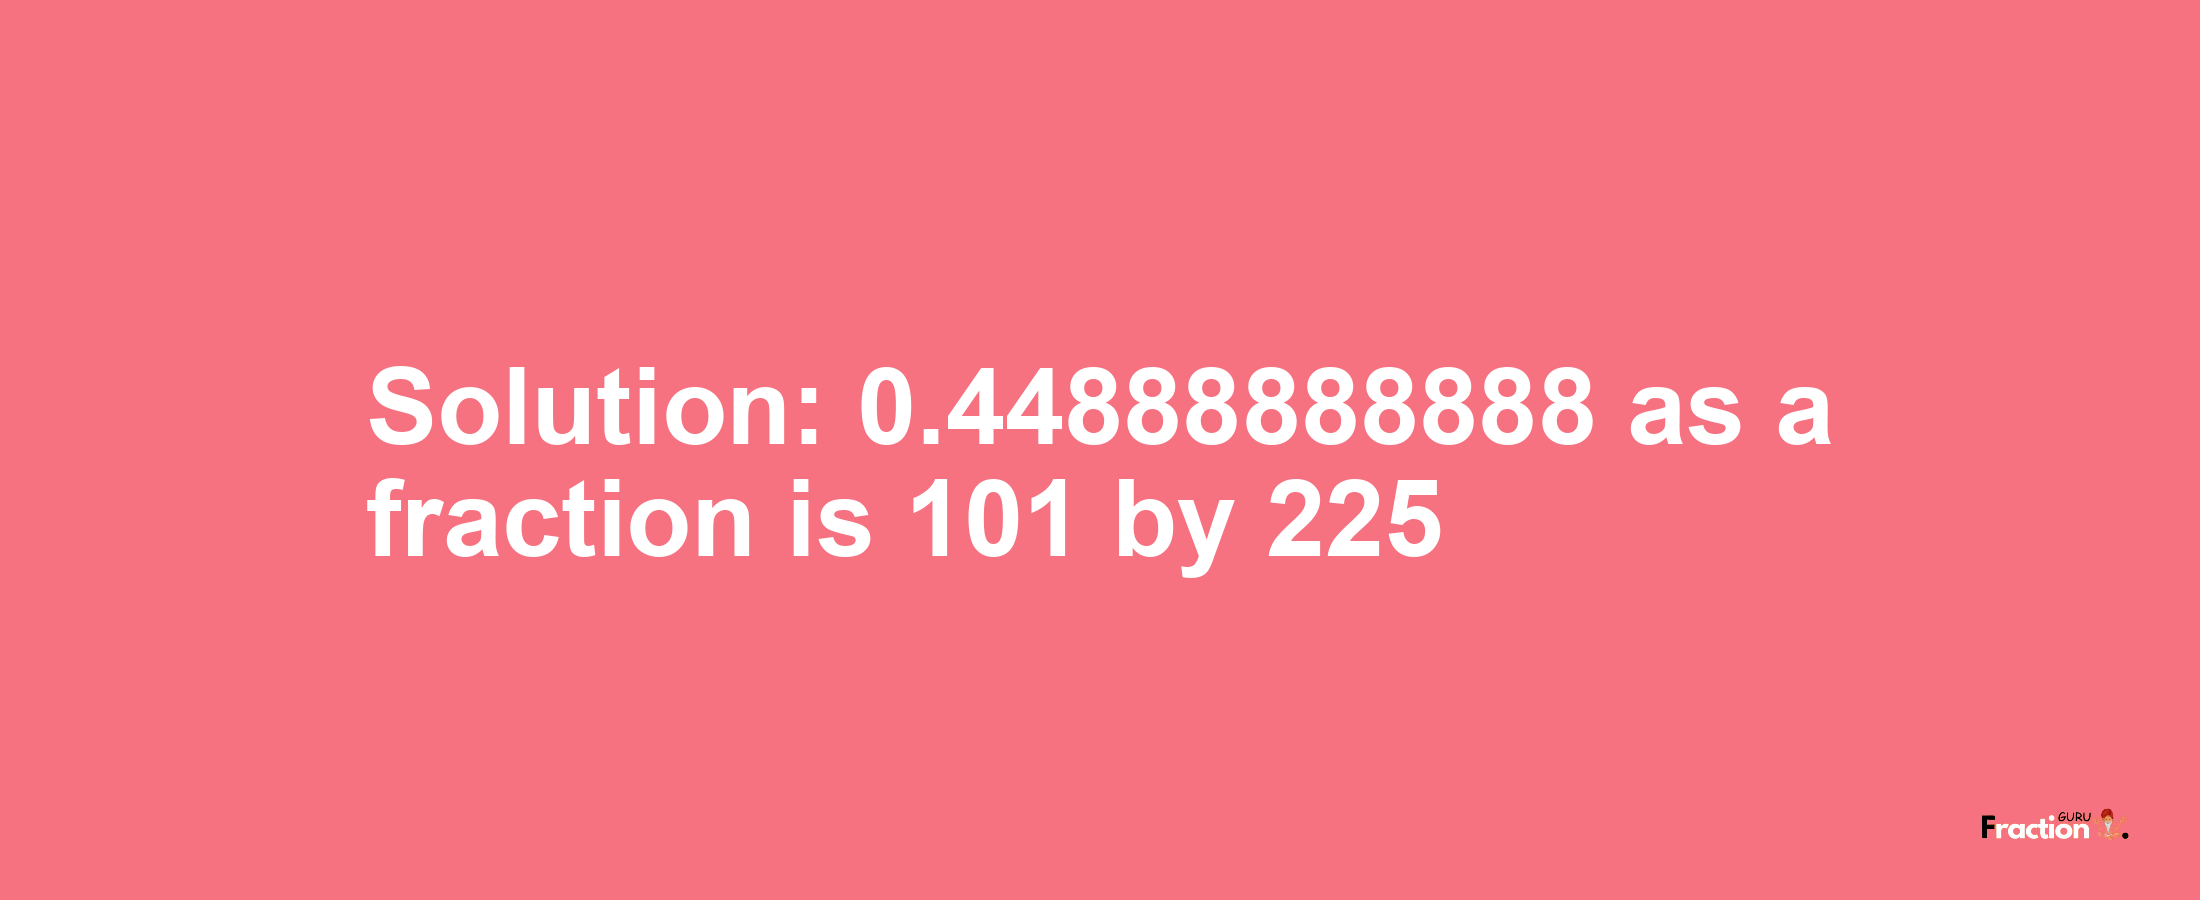 Solution:0.44888888888 as a fraction is 101/225